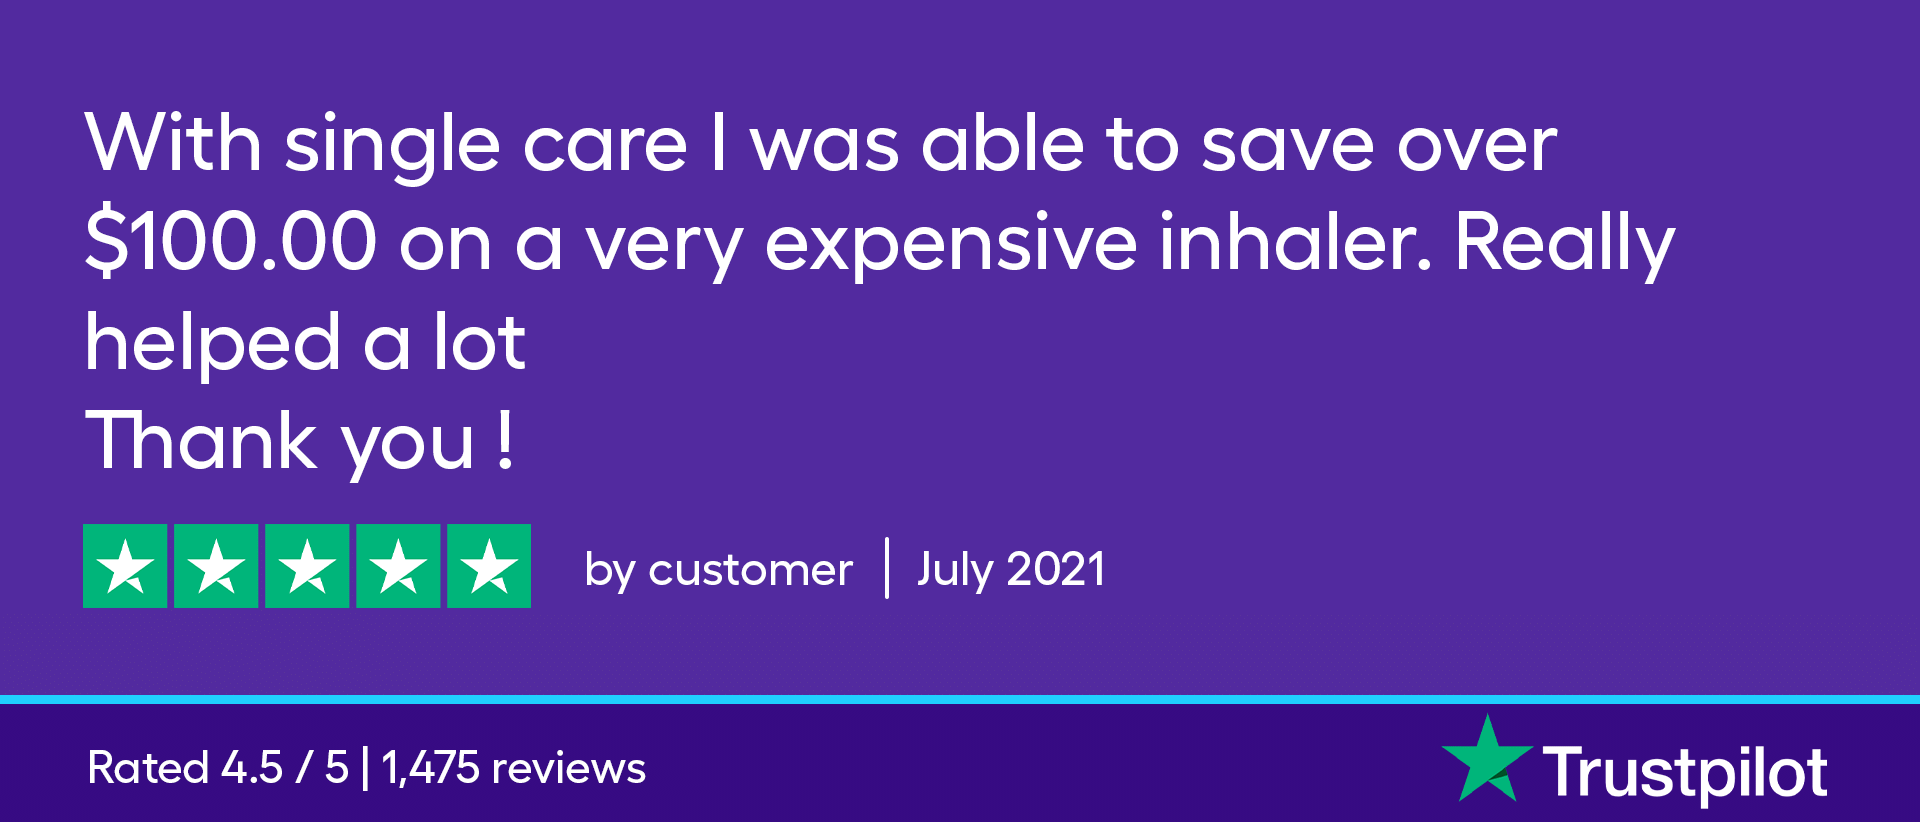 With SingleCare I was able to save over $100 on a very expensive inhaler. Really helped a lot. Thank you! 